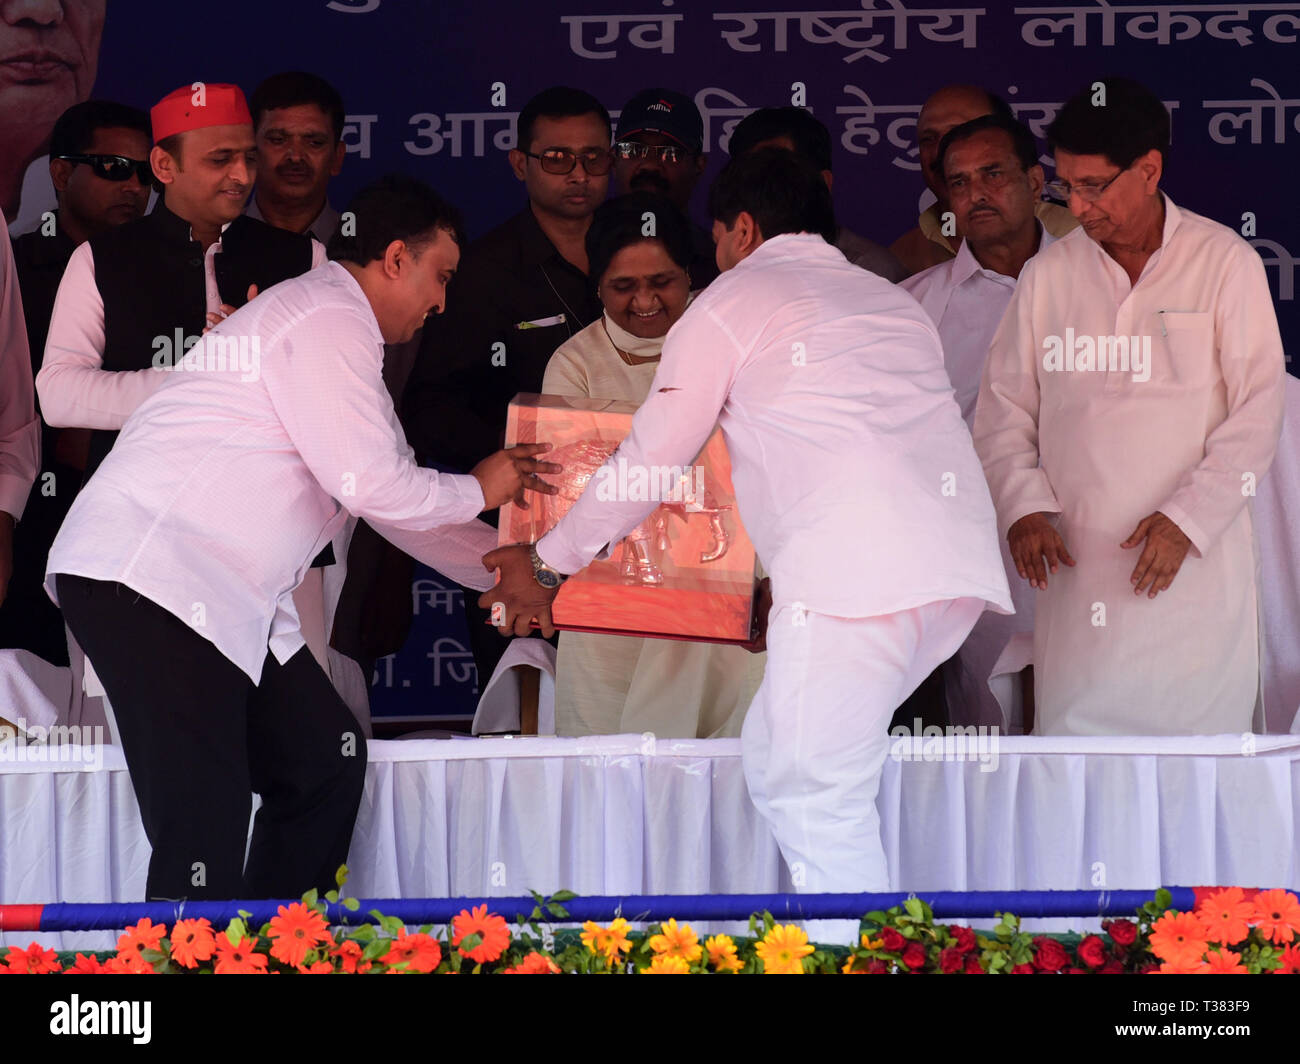 Saharanpur, Uttar Pradesh, India. 7th Apr, 2019. Saharanpur: Bahujan Samaj party workers offer a momento to Mayawati during a joint election campaign rally of Samajwadi Party, Bahujan Samaj party and Rastriya Lok Dal at Deoband in Saharanpur on 07-04-2019. Credit: Prabhat Kumar Verma/ZUMA Wire/Alamy Live News Stock Photo